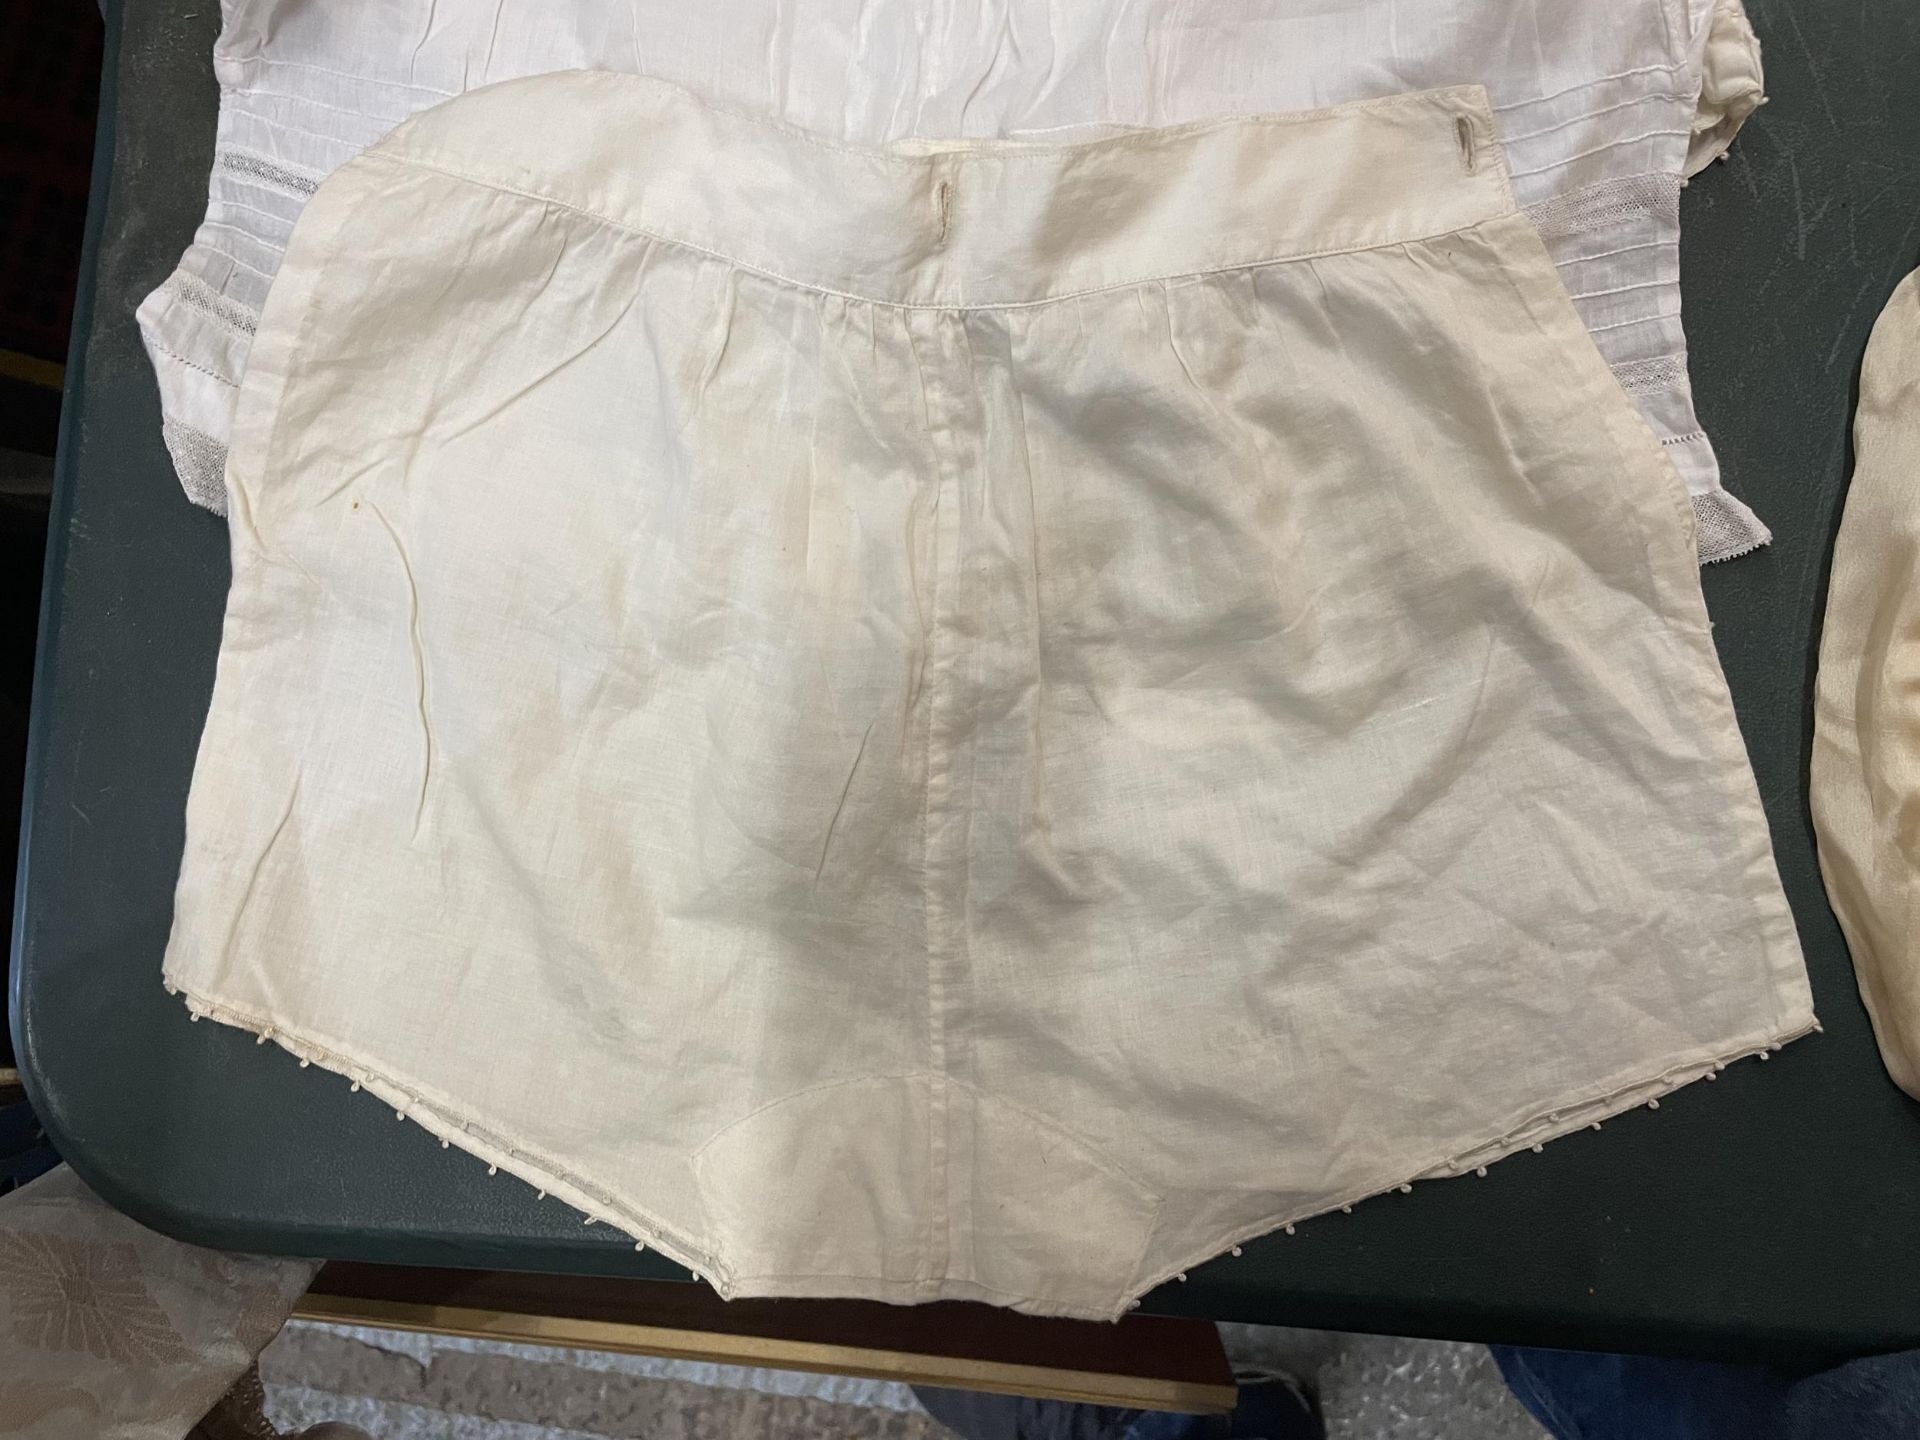 FOUR PAIRS OF VINTAGE LINGERIE SHORTS - Image 2 of 5